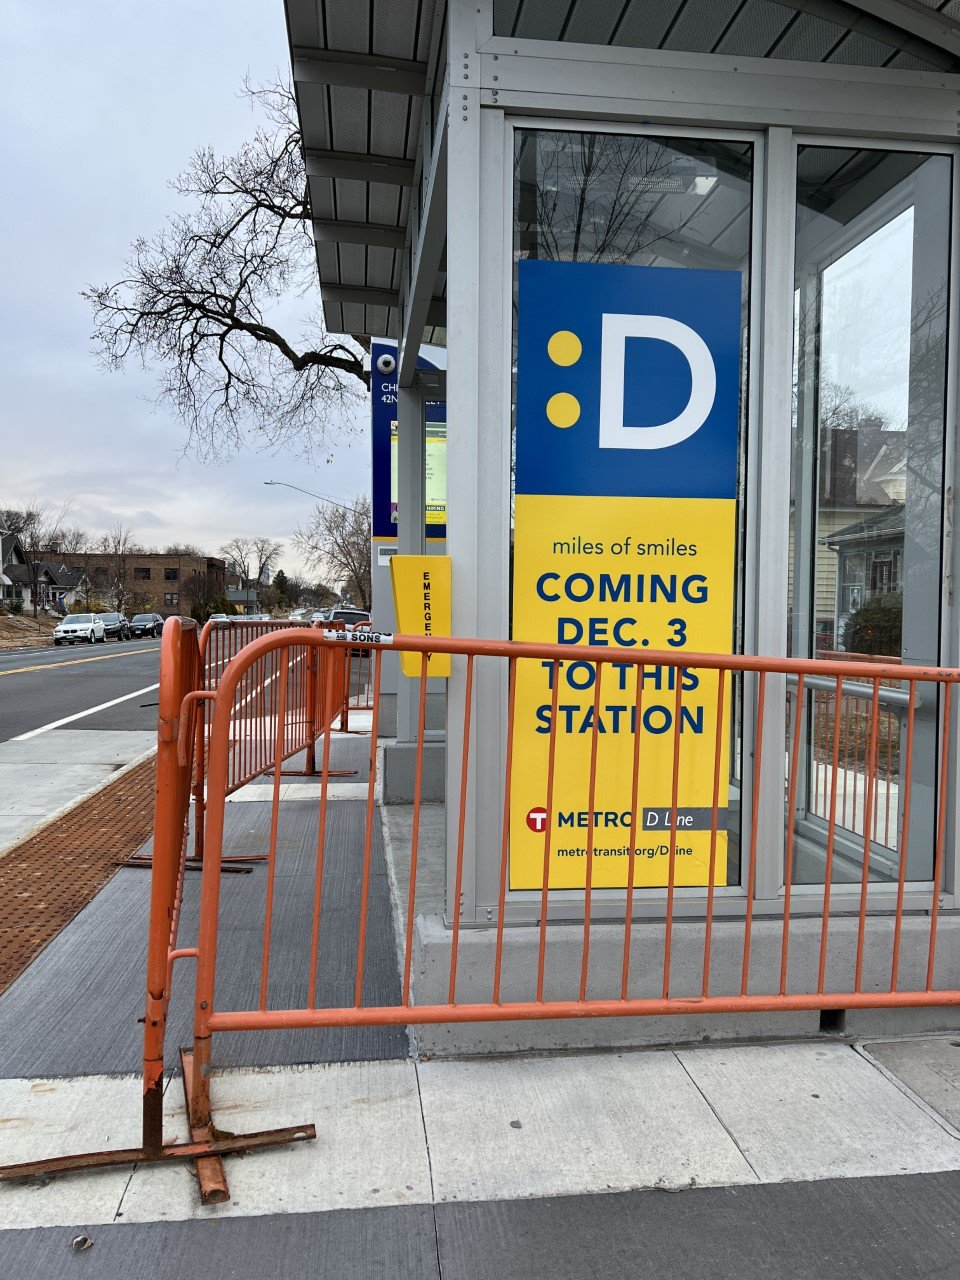 Starting when it opens on Dec. 3, the D Line will also detour to Park/Portland, with a modified routing. Southbound, the D Line and Route 5 will detour off Chicago Ave. via 35th St., Portland Ave., and 42nd Street, as the Route 5 does today. Northbound, the D Line and Route 5 will detour via 39th St., Park Ave., and 36th St. Temporary stations will be located at Park/Portland avenues and 38th St.